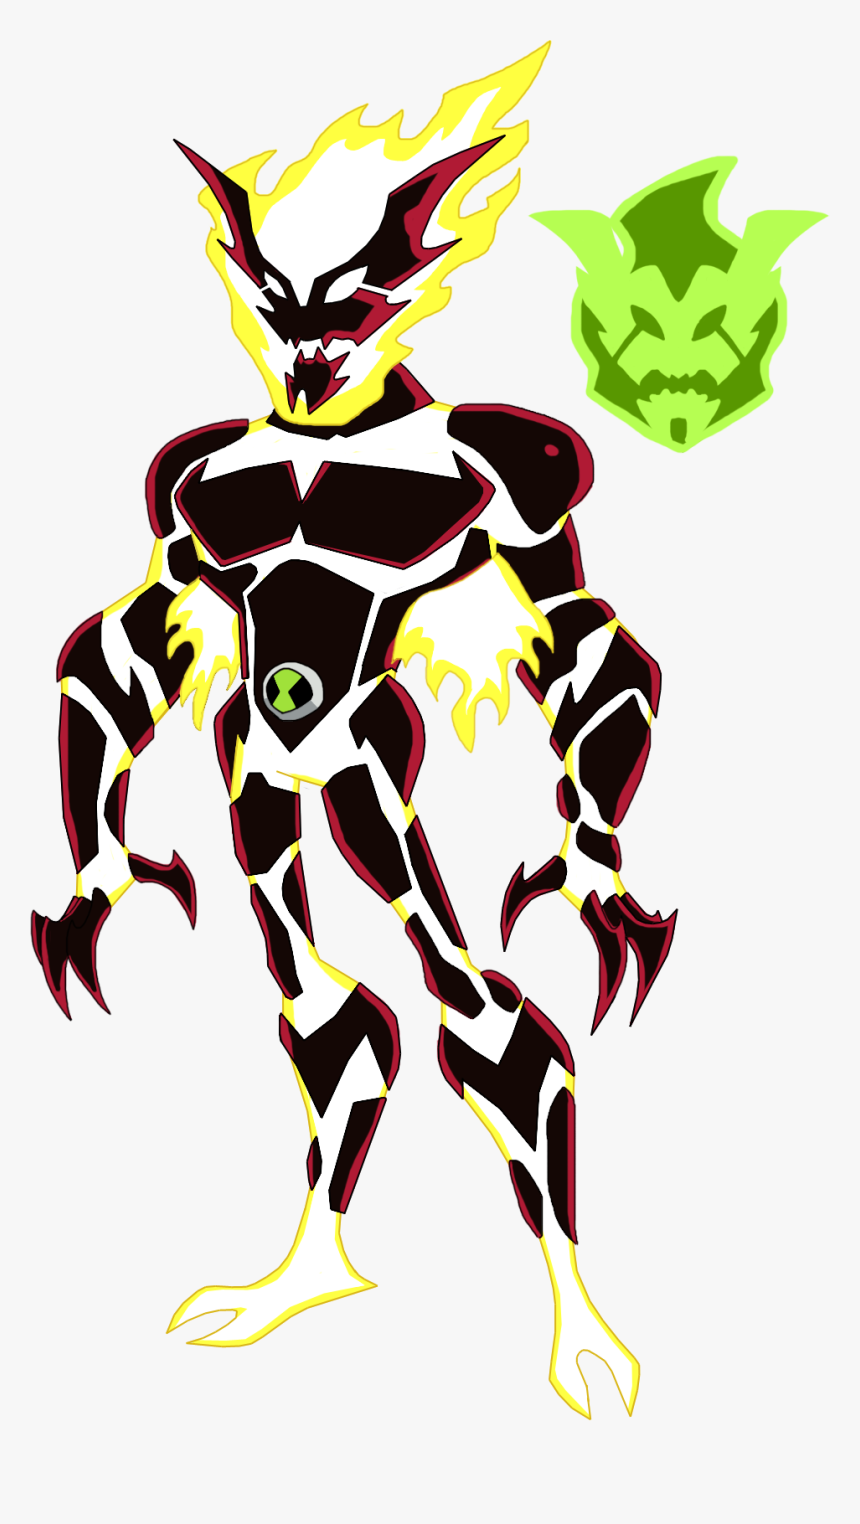 Image Result For Ben 10 Fusions - Ben 10 Heatblast Fusions, HD Png Download, Free Download